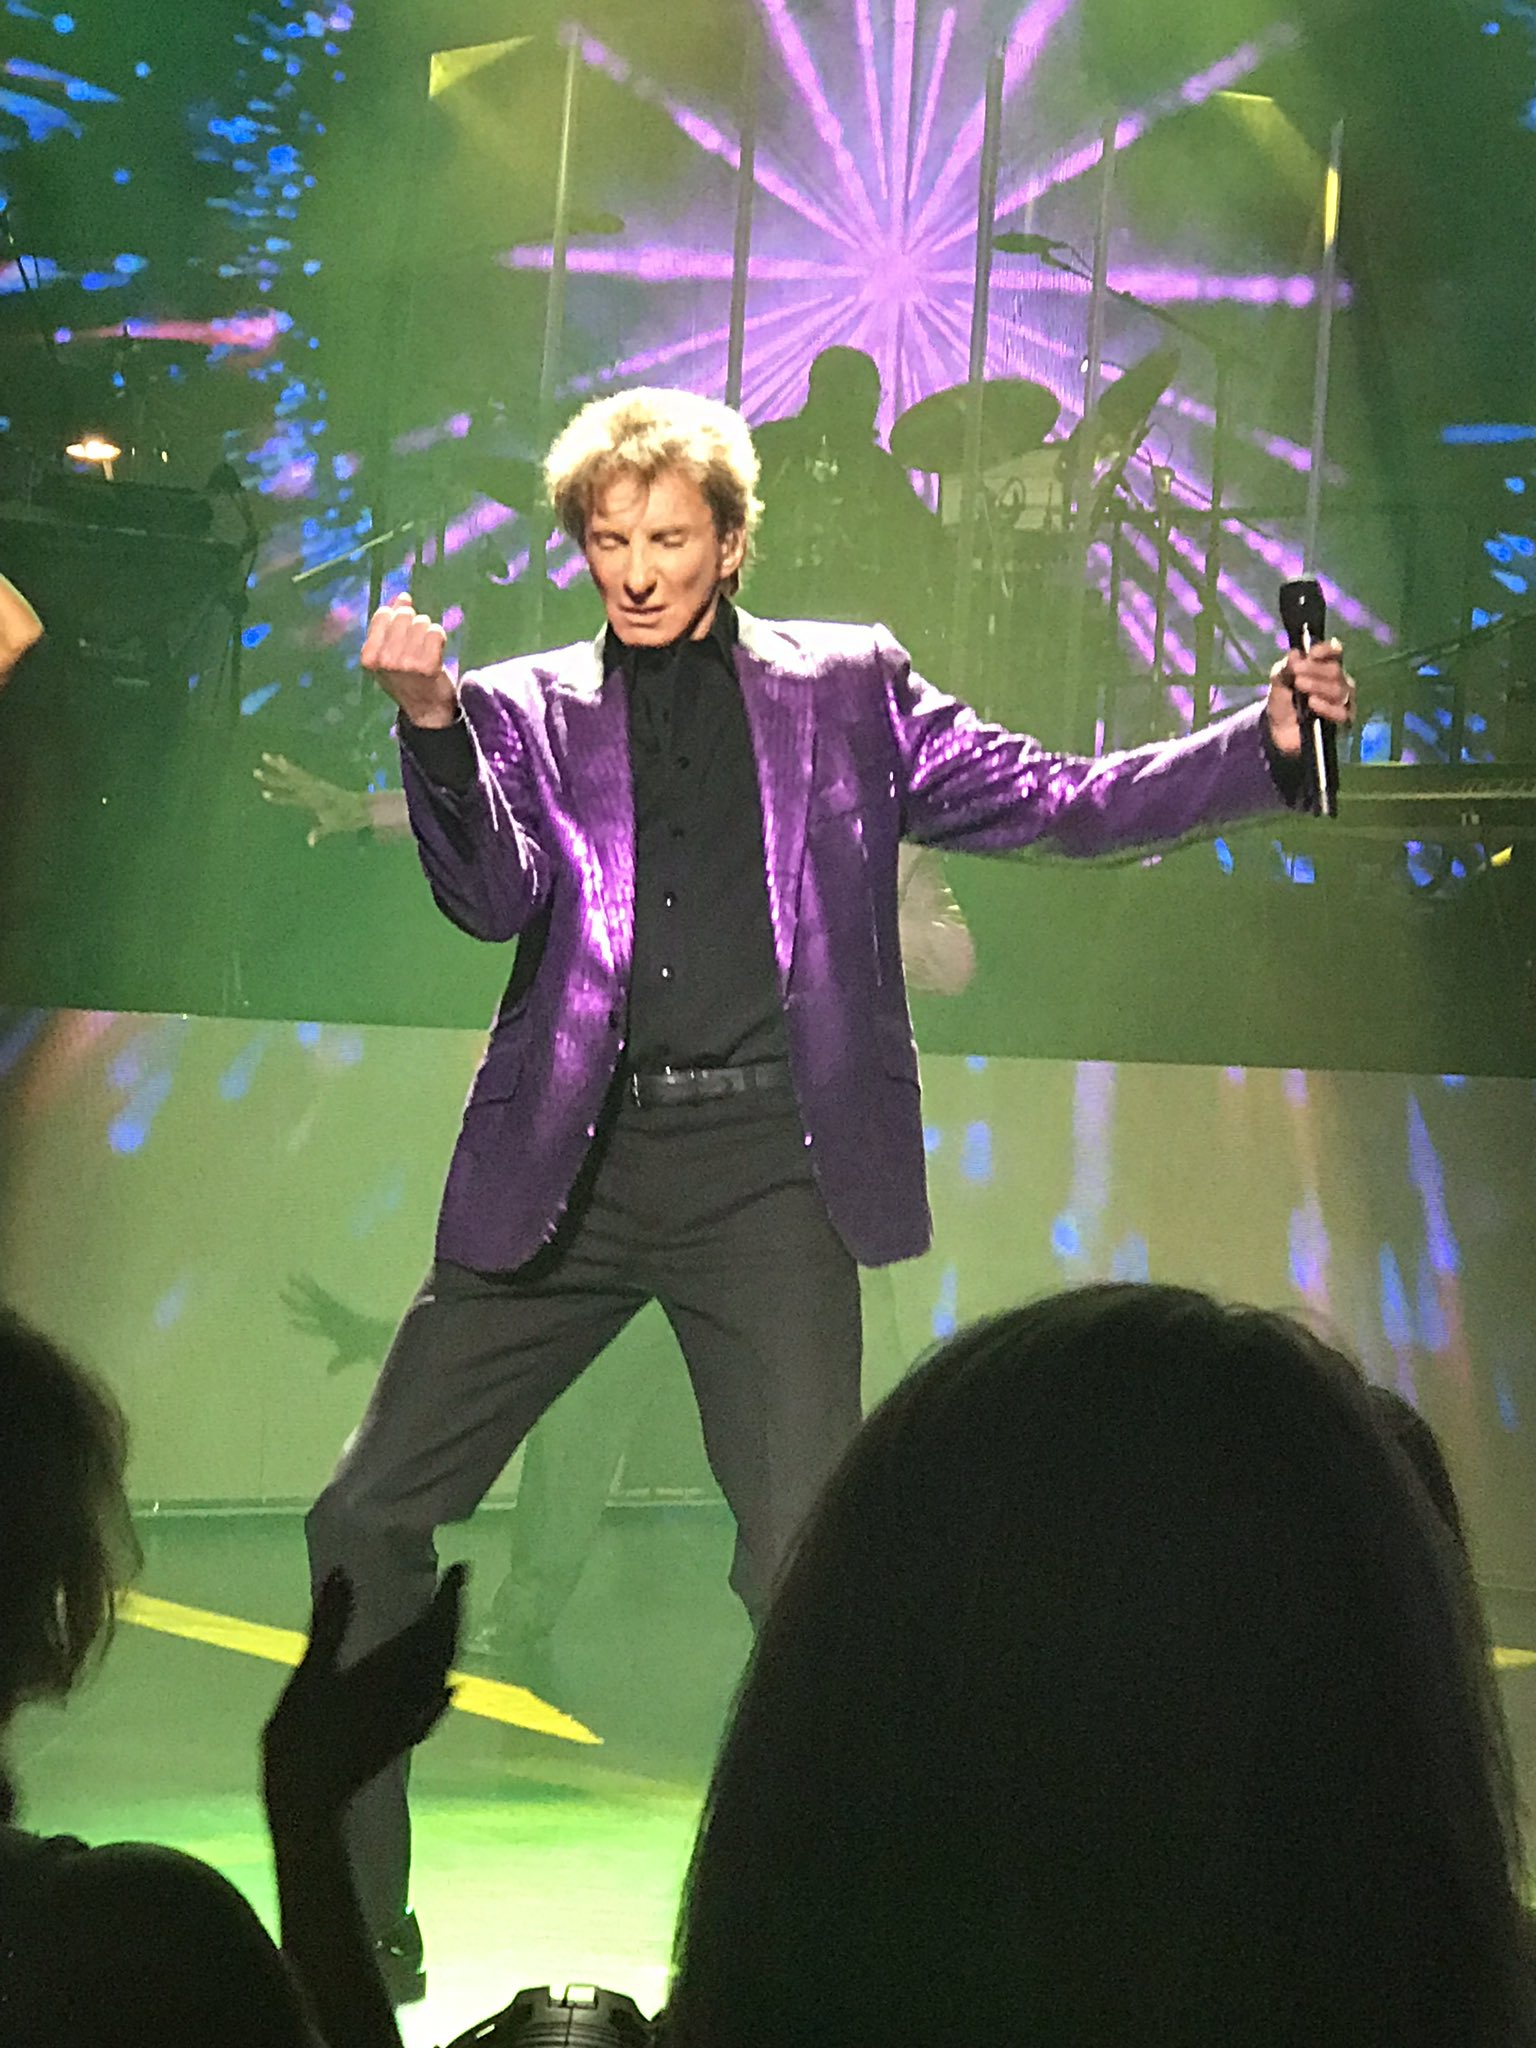  Happy Birthday to me!  Great show Barry Manilow ! 